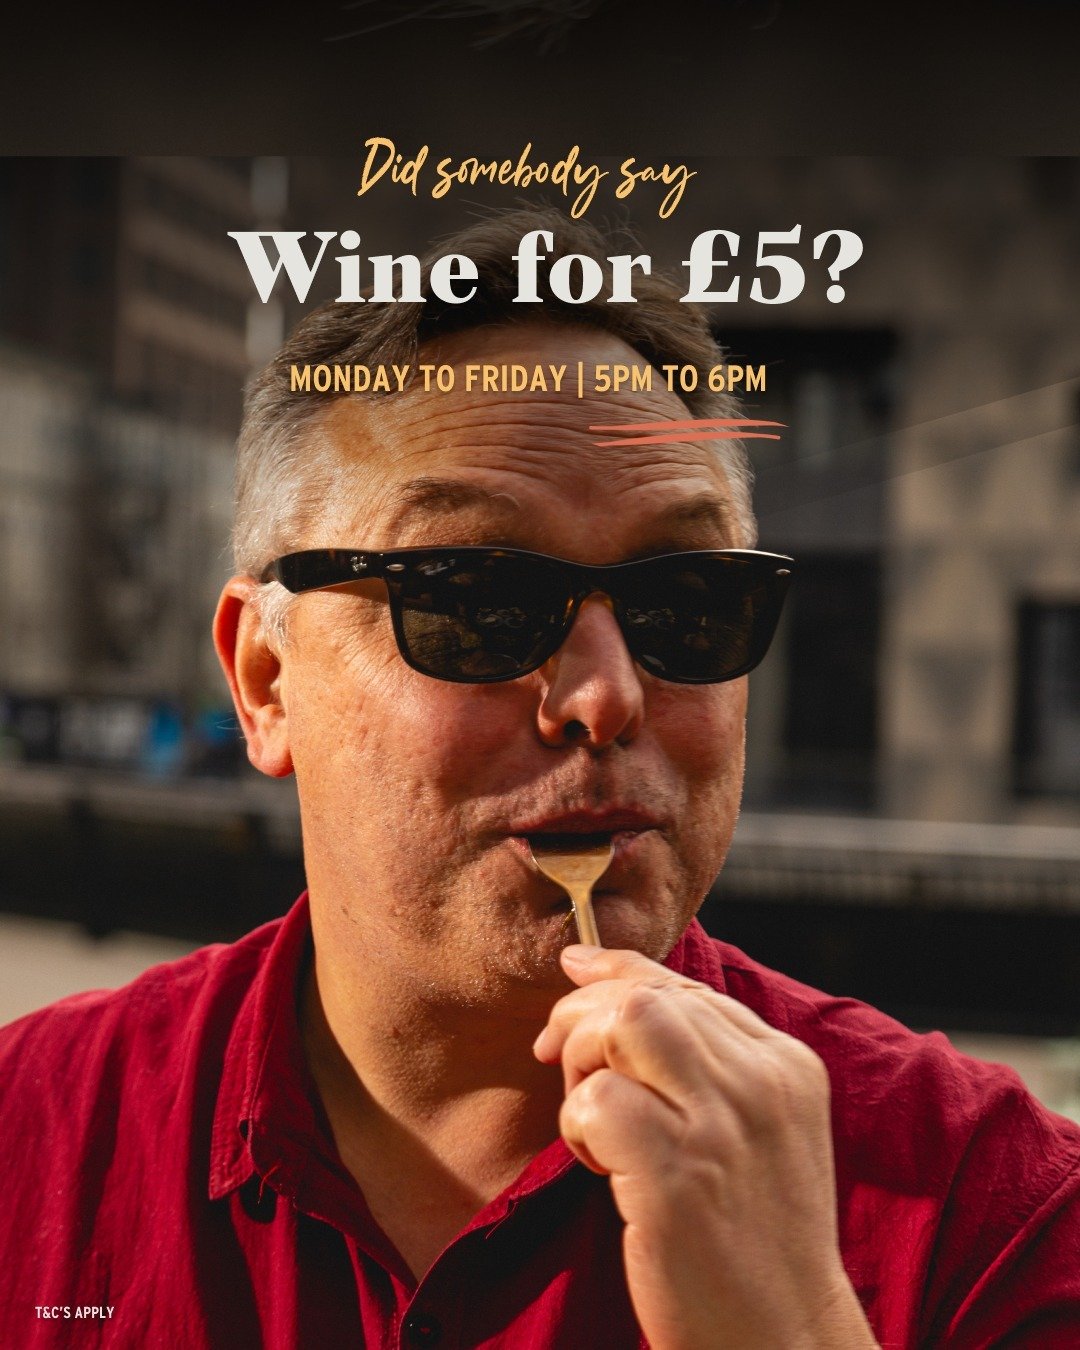 Still haven't popped by our stores for Wine O'Clock? Where've you been hiding? 🍷

For just &pound;5 a glass, treat yourself to premium organic wines and pair your pour with our tempting bar bites, with two small plates for &pound;10, or grab a quick